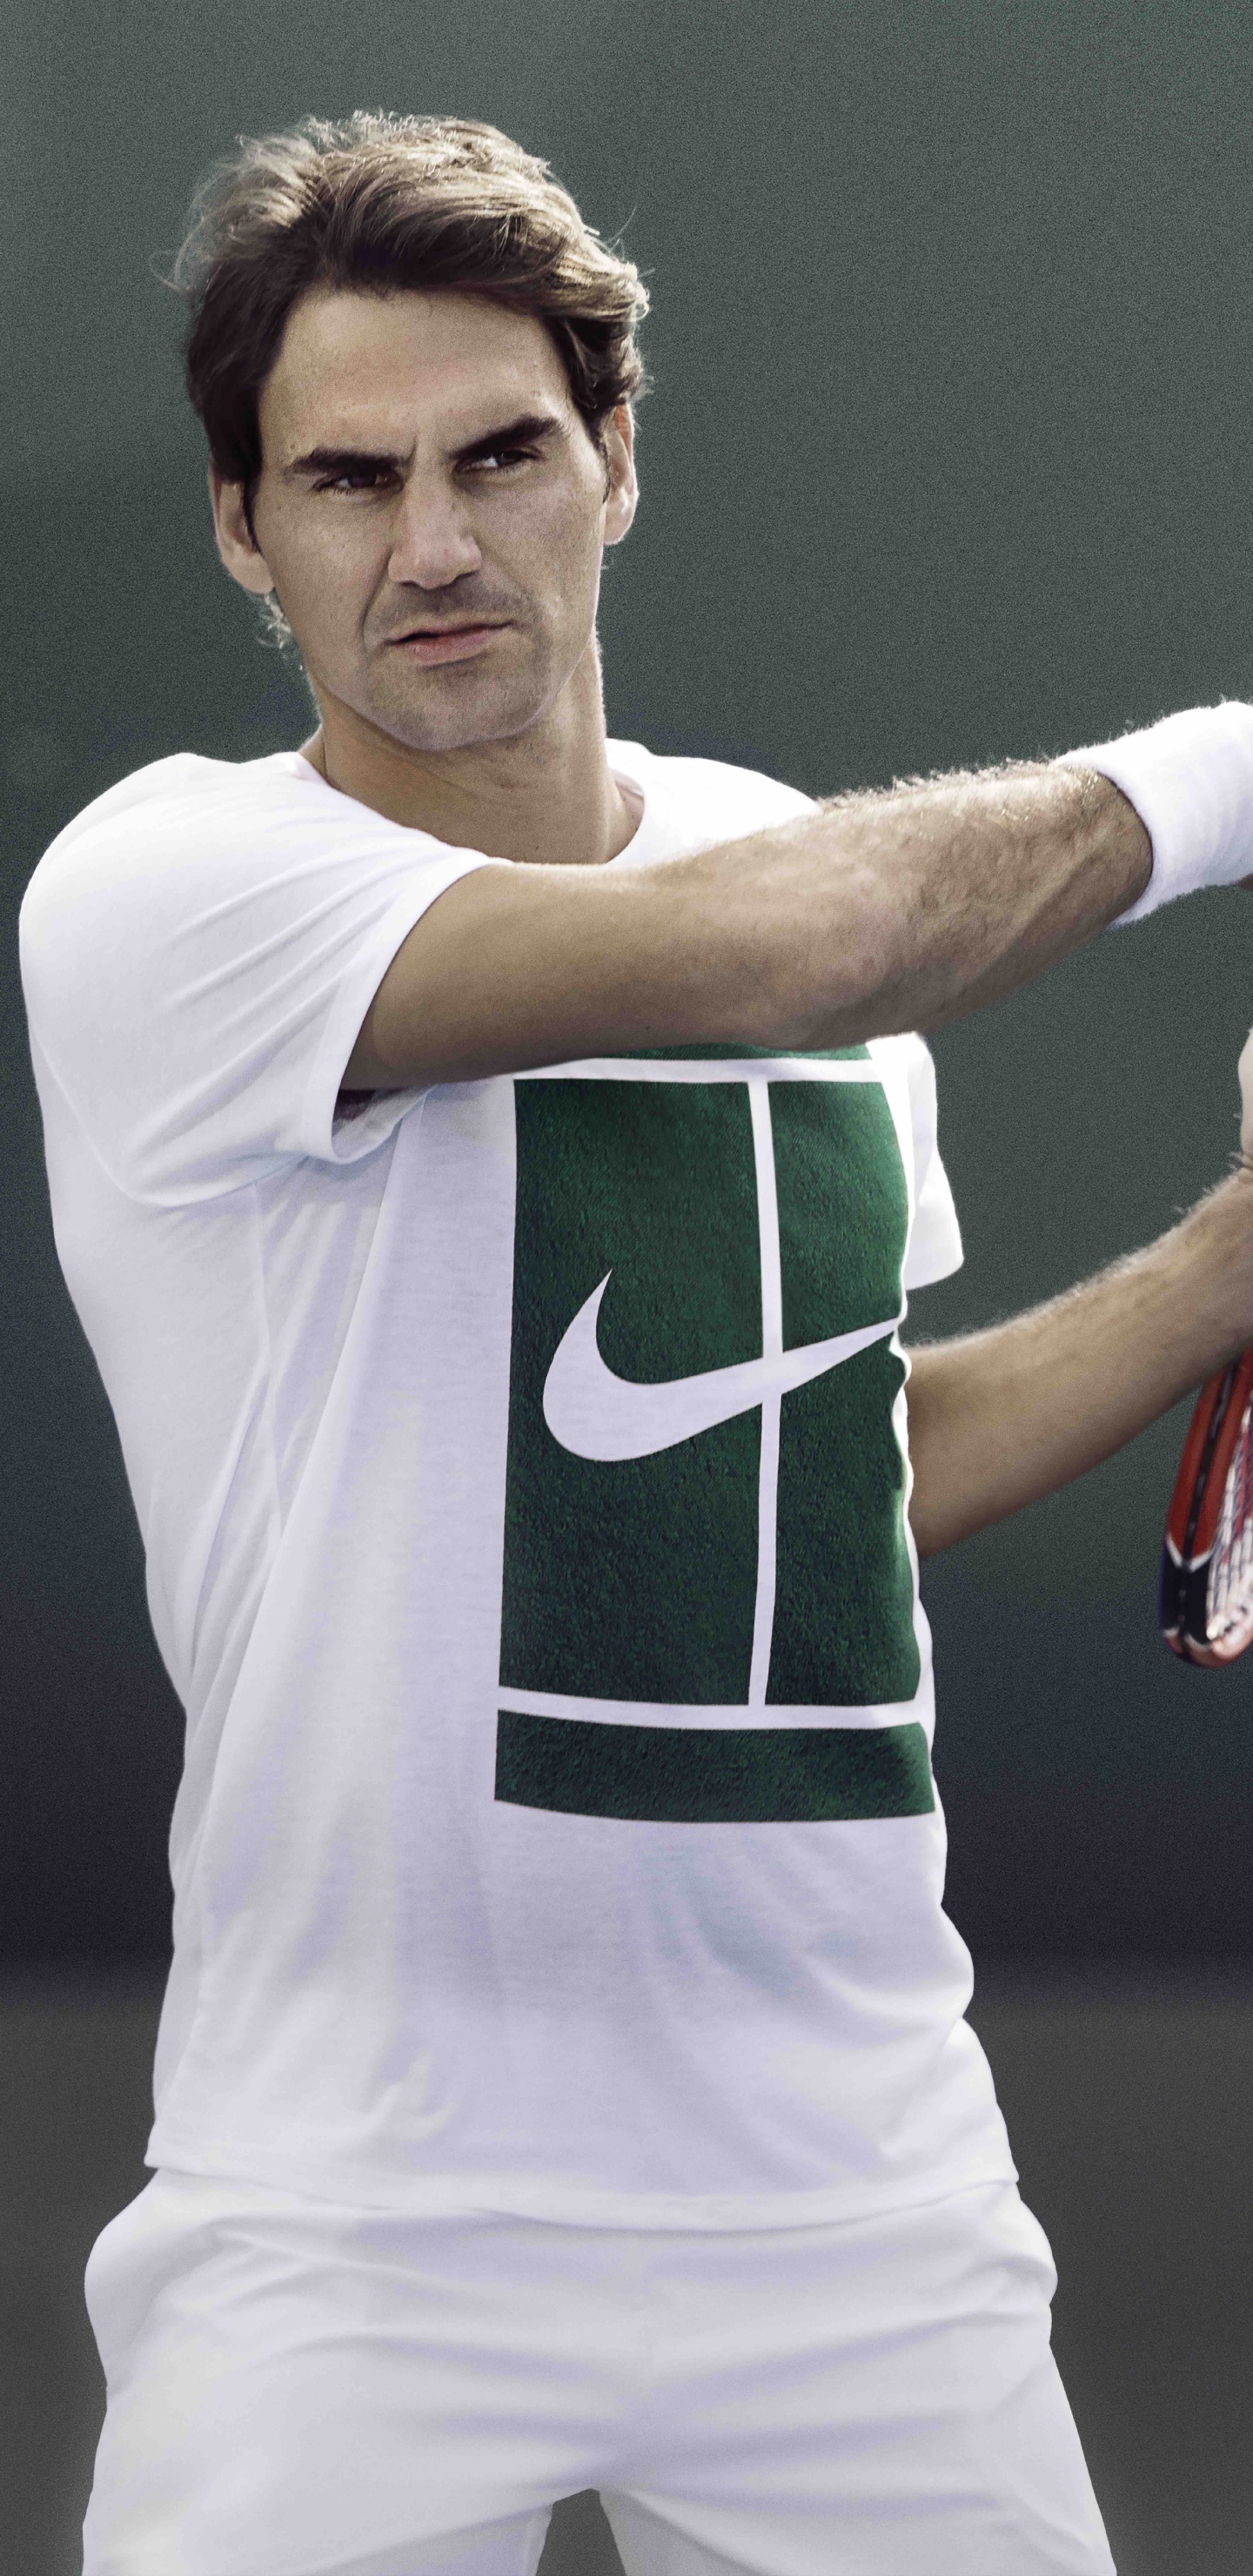 Man in Green and White Nike Jersey Shirt Holding Red and White Tennis Racket. Wallpaper in 1440x2960 Resolution